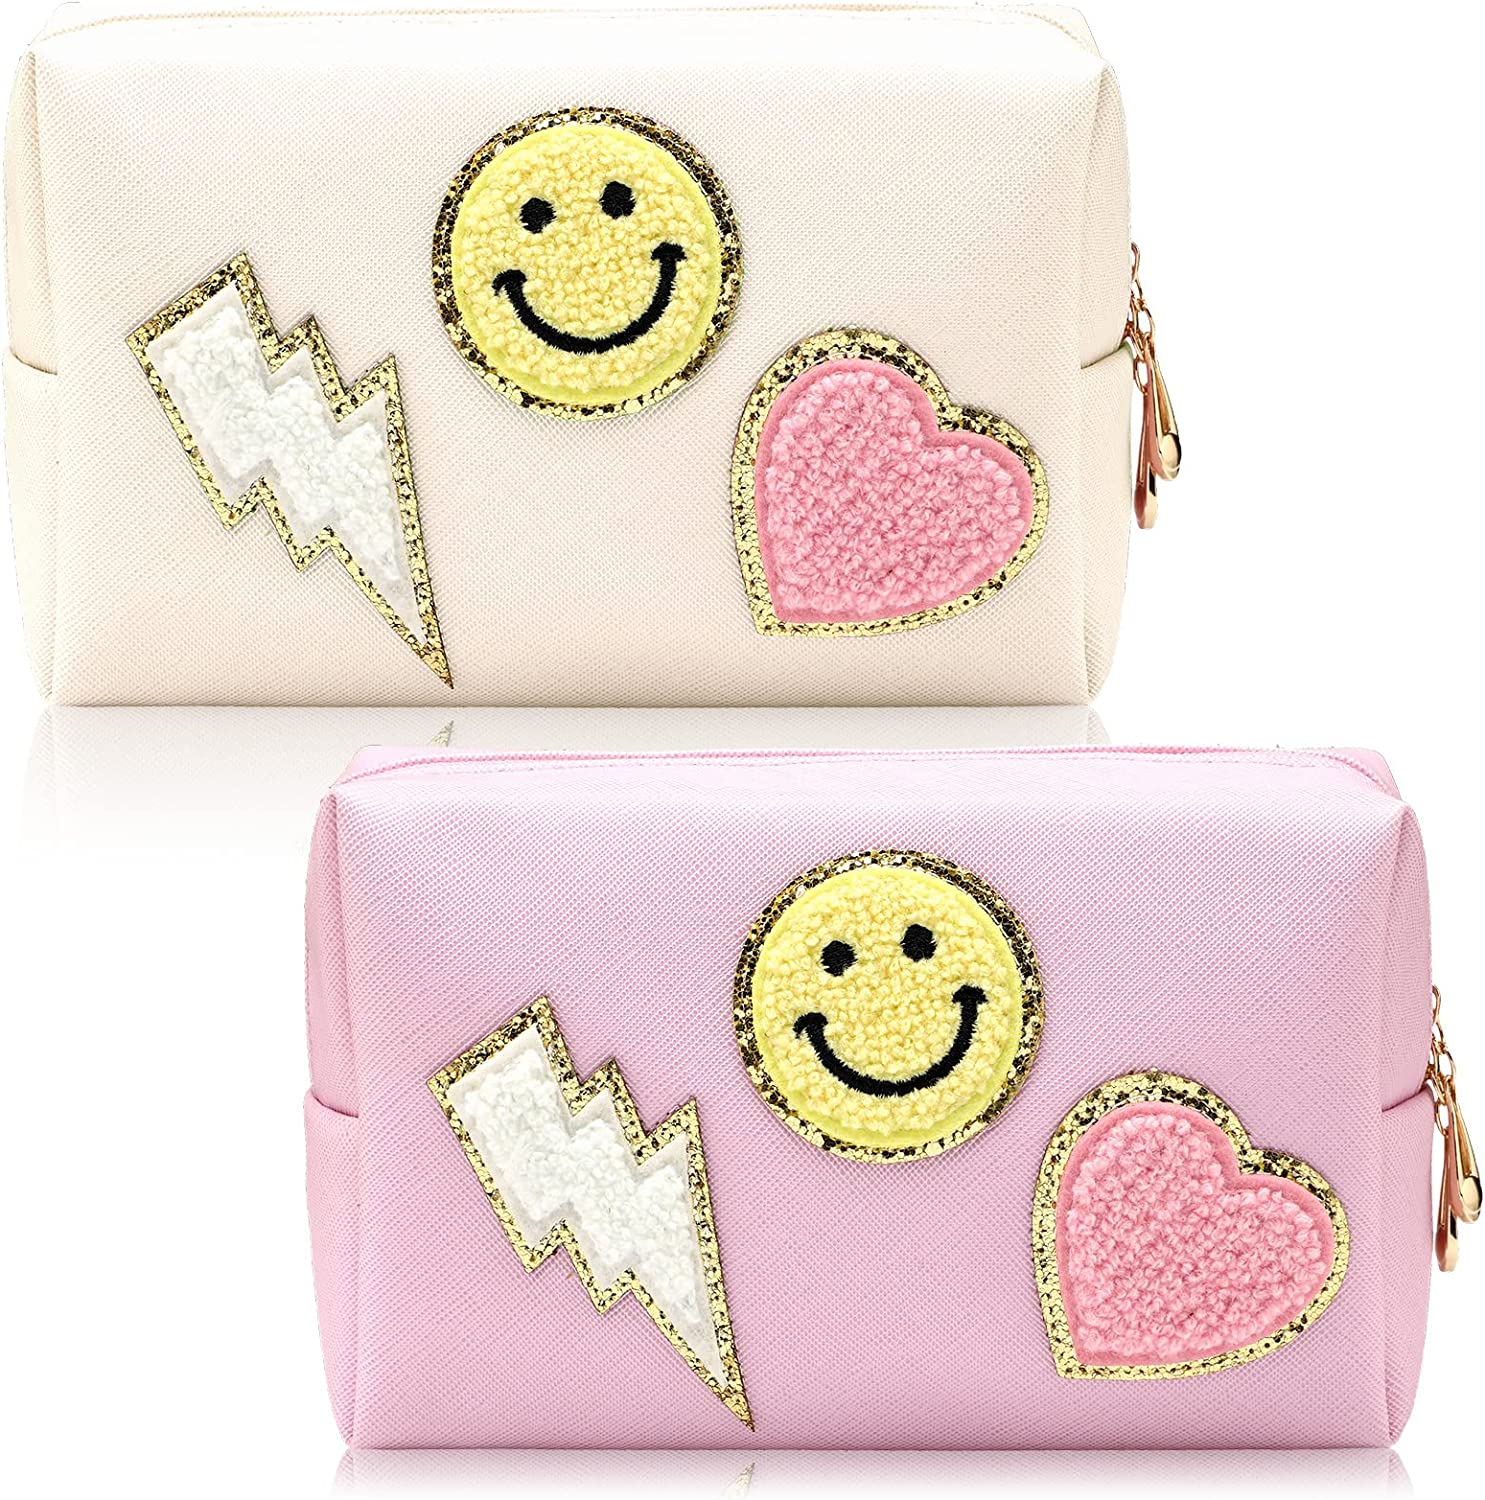 Two pouches with a heart, smiley face, and lightening bolt patch on them in pink and white 